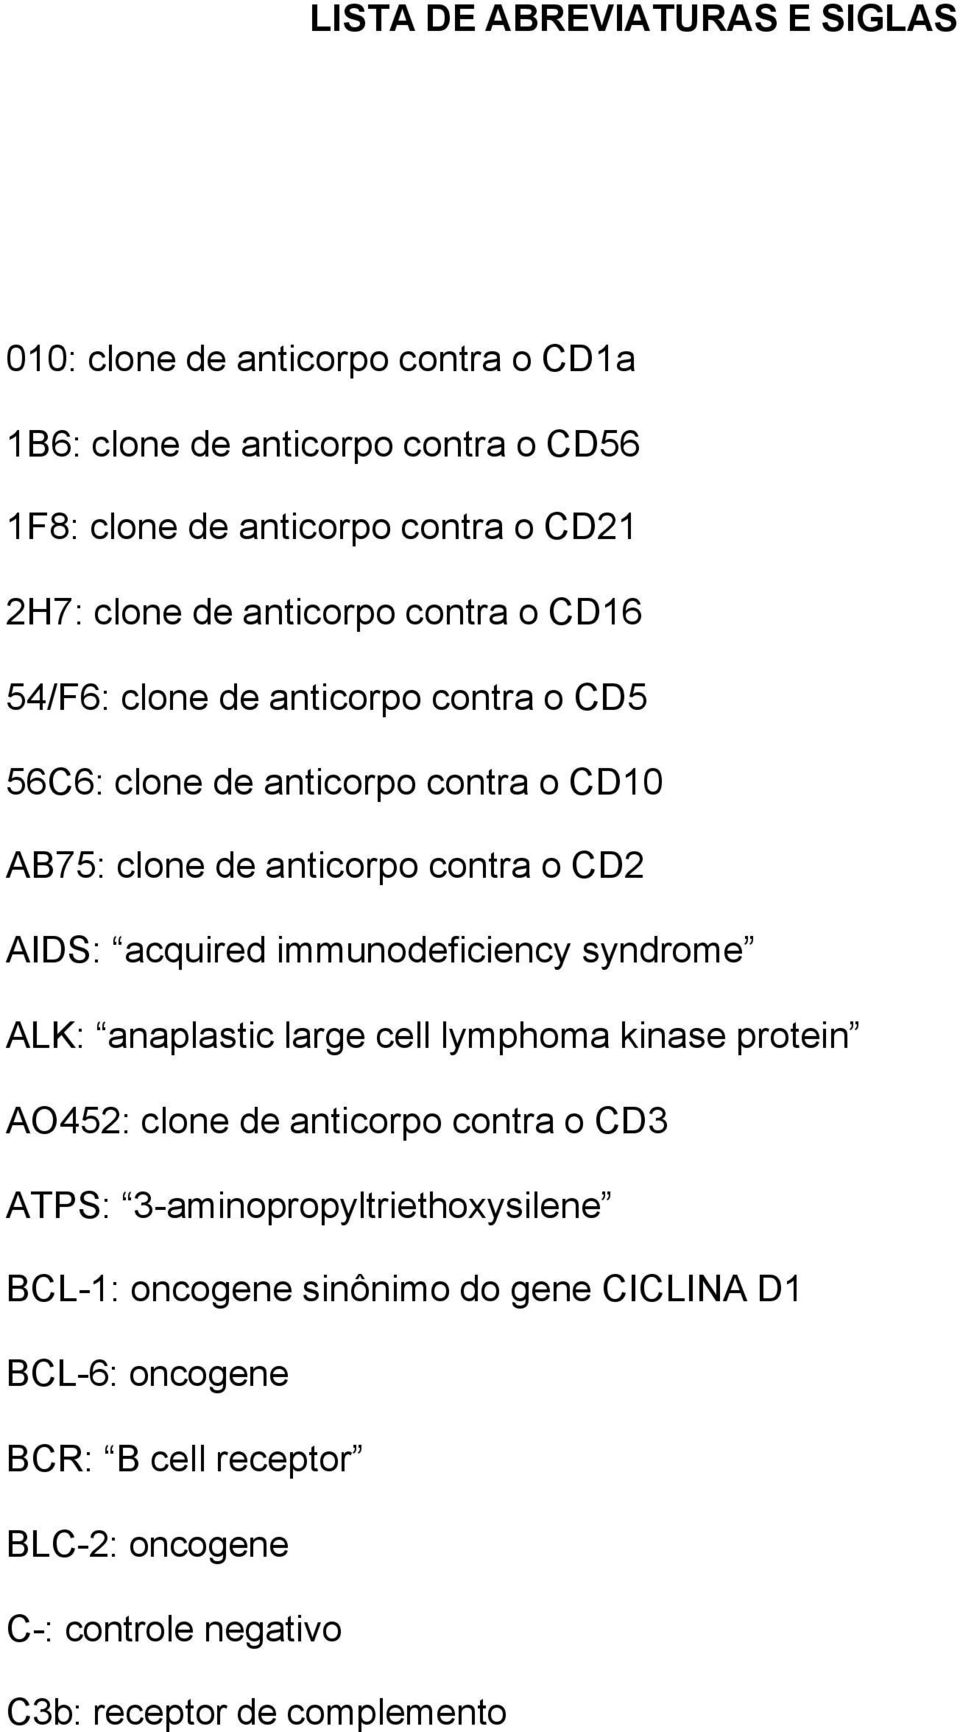 AIDS: acquired immunodeficiency syndrome ALK: anaplastic large cell lymphoma kinase protein AO452: clone de anticorpo contra o CD3 ATPS: